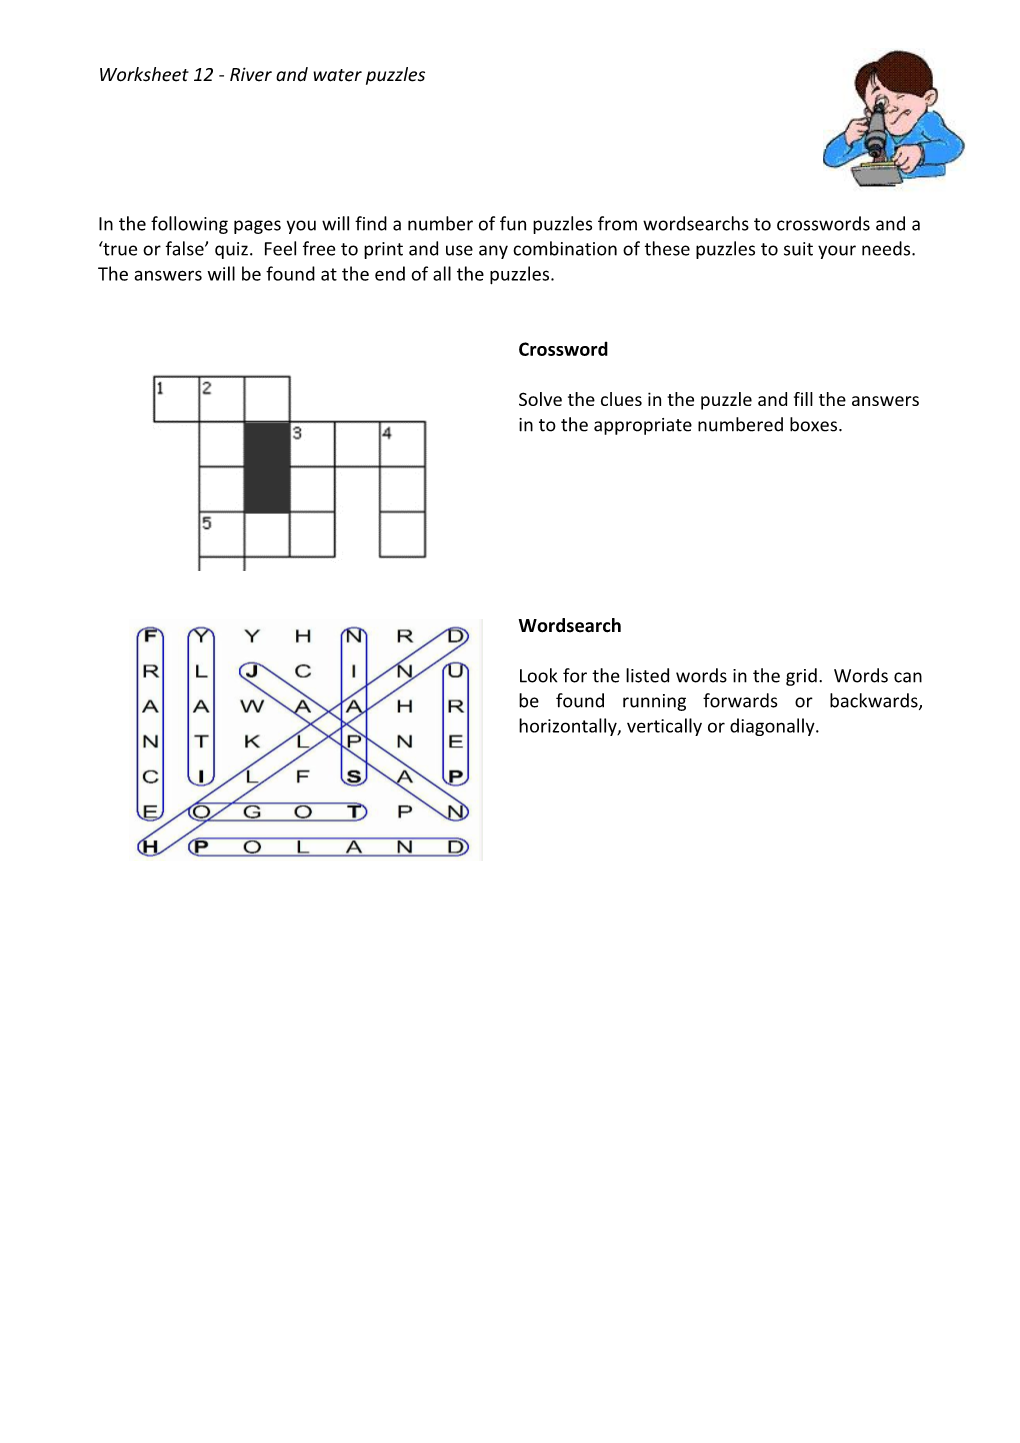 Worksheet 12 - River and Water Puzzles